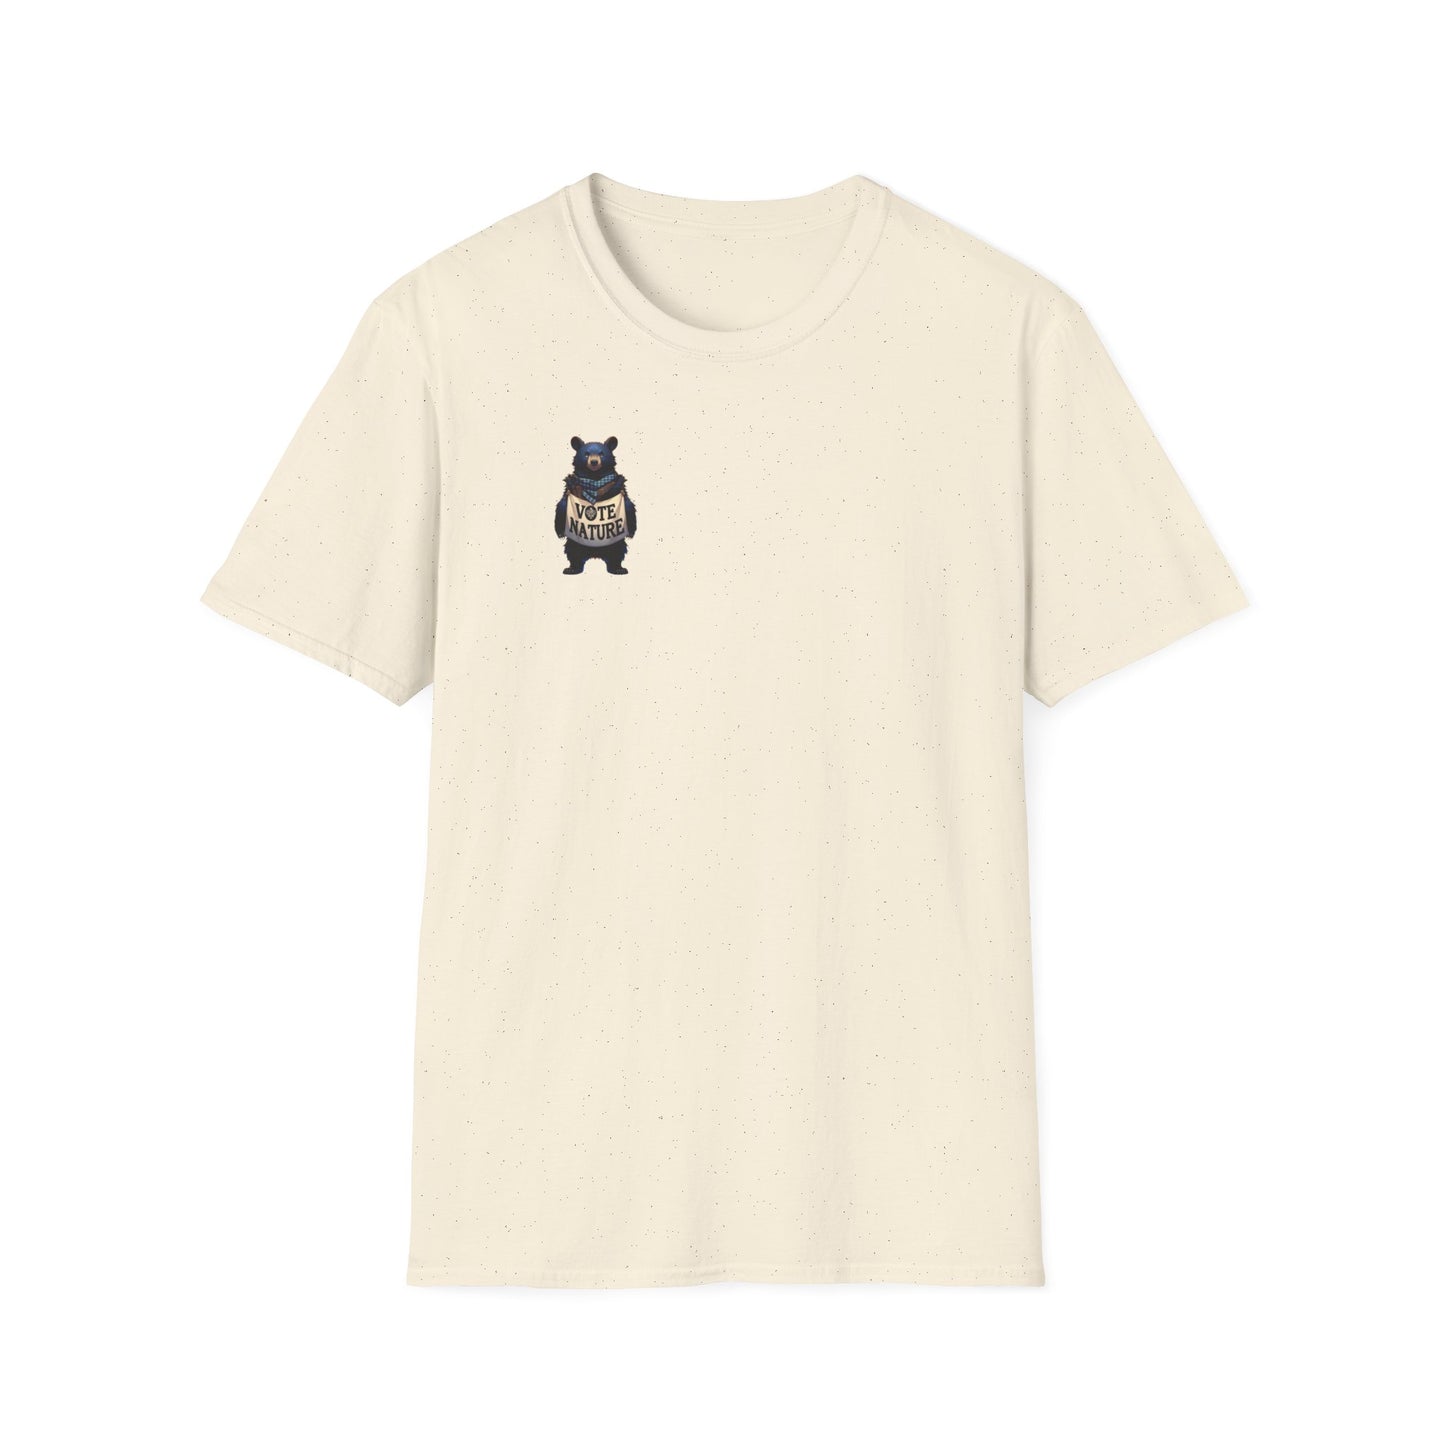 Inspiring Black Bear Soft Style t-shirt: Vote Nature |unisex| Minimalist Protest, Resistance, Activism, Quiet and Strong! Show You Care!